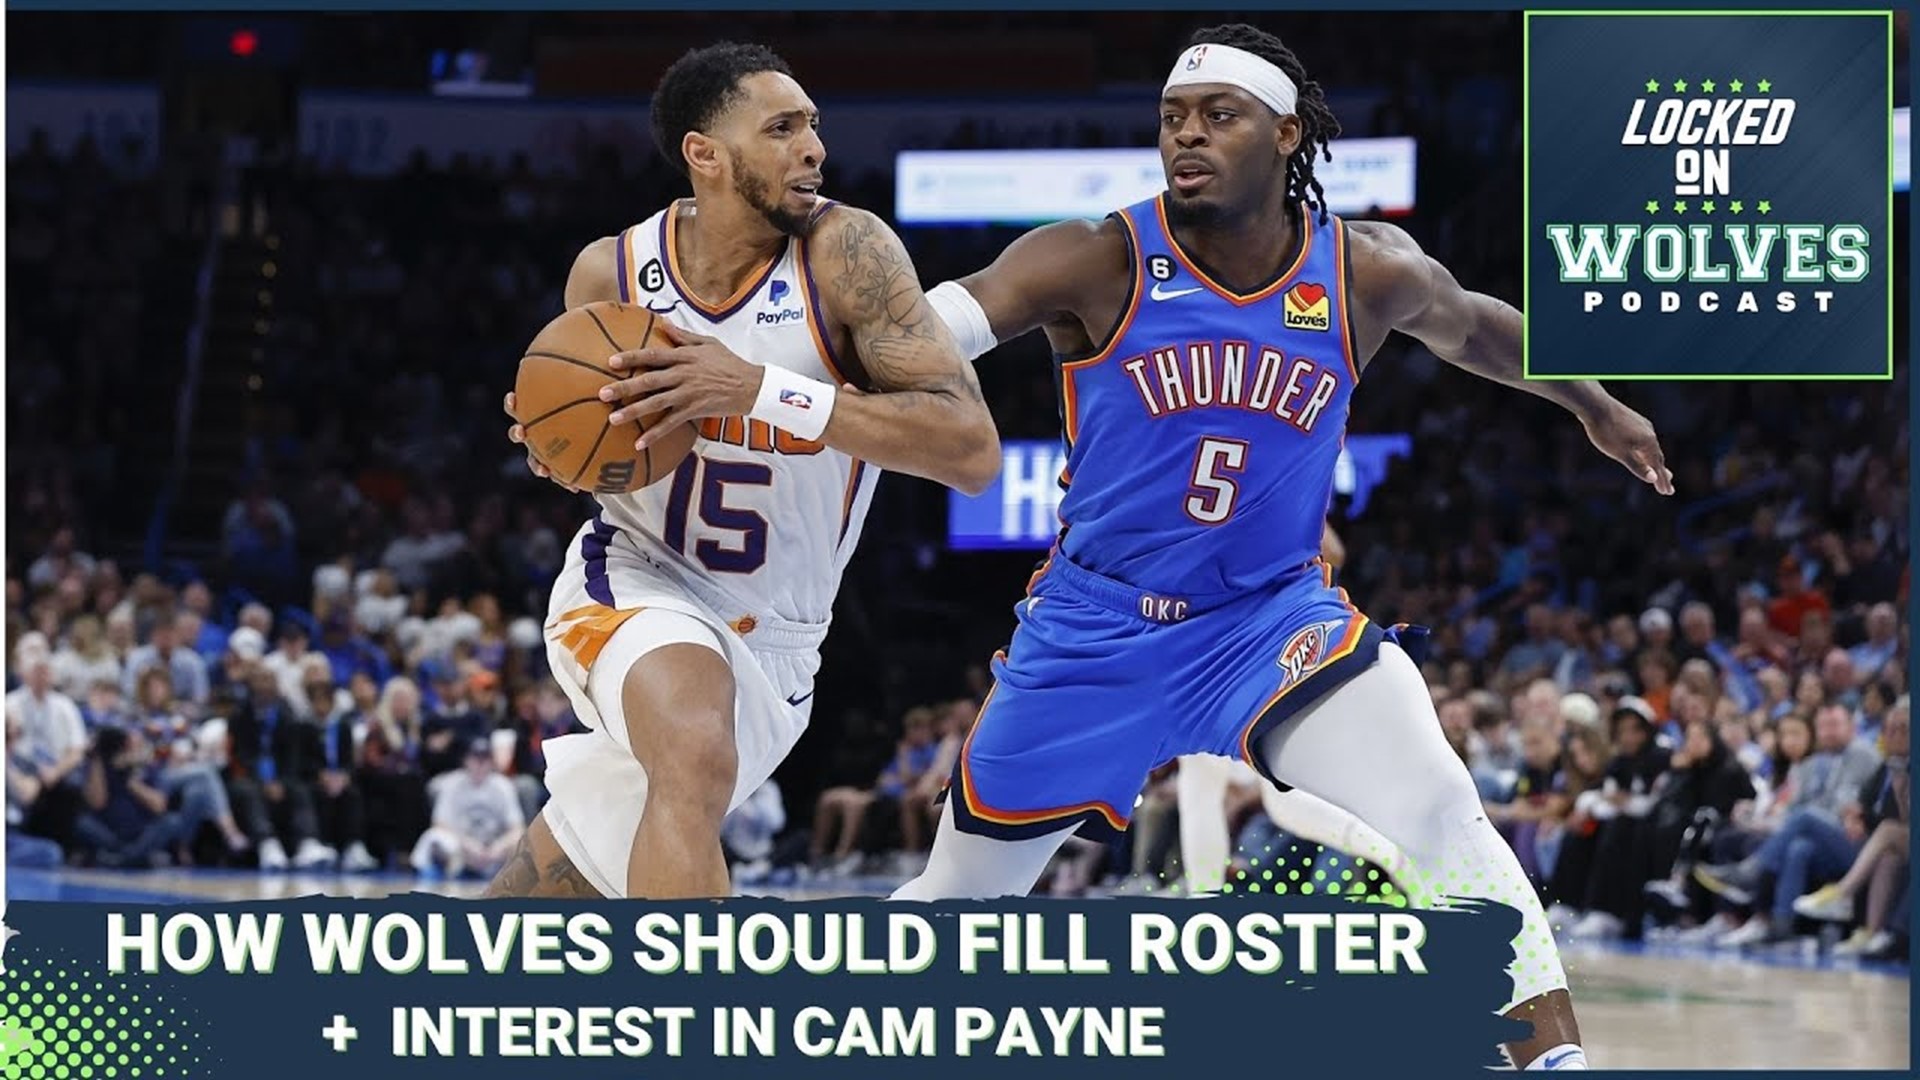 What should Timberwolves do with last roster spot? Plus, interest in Cameron Payne and more